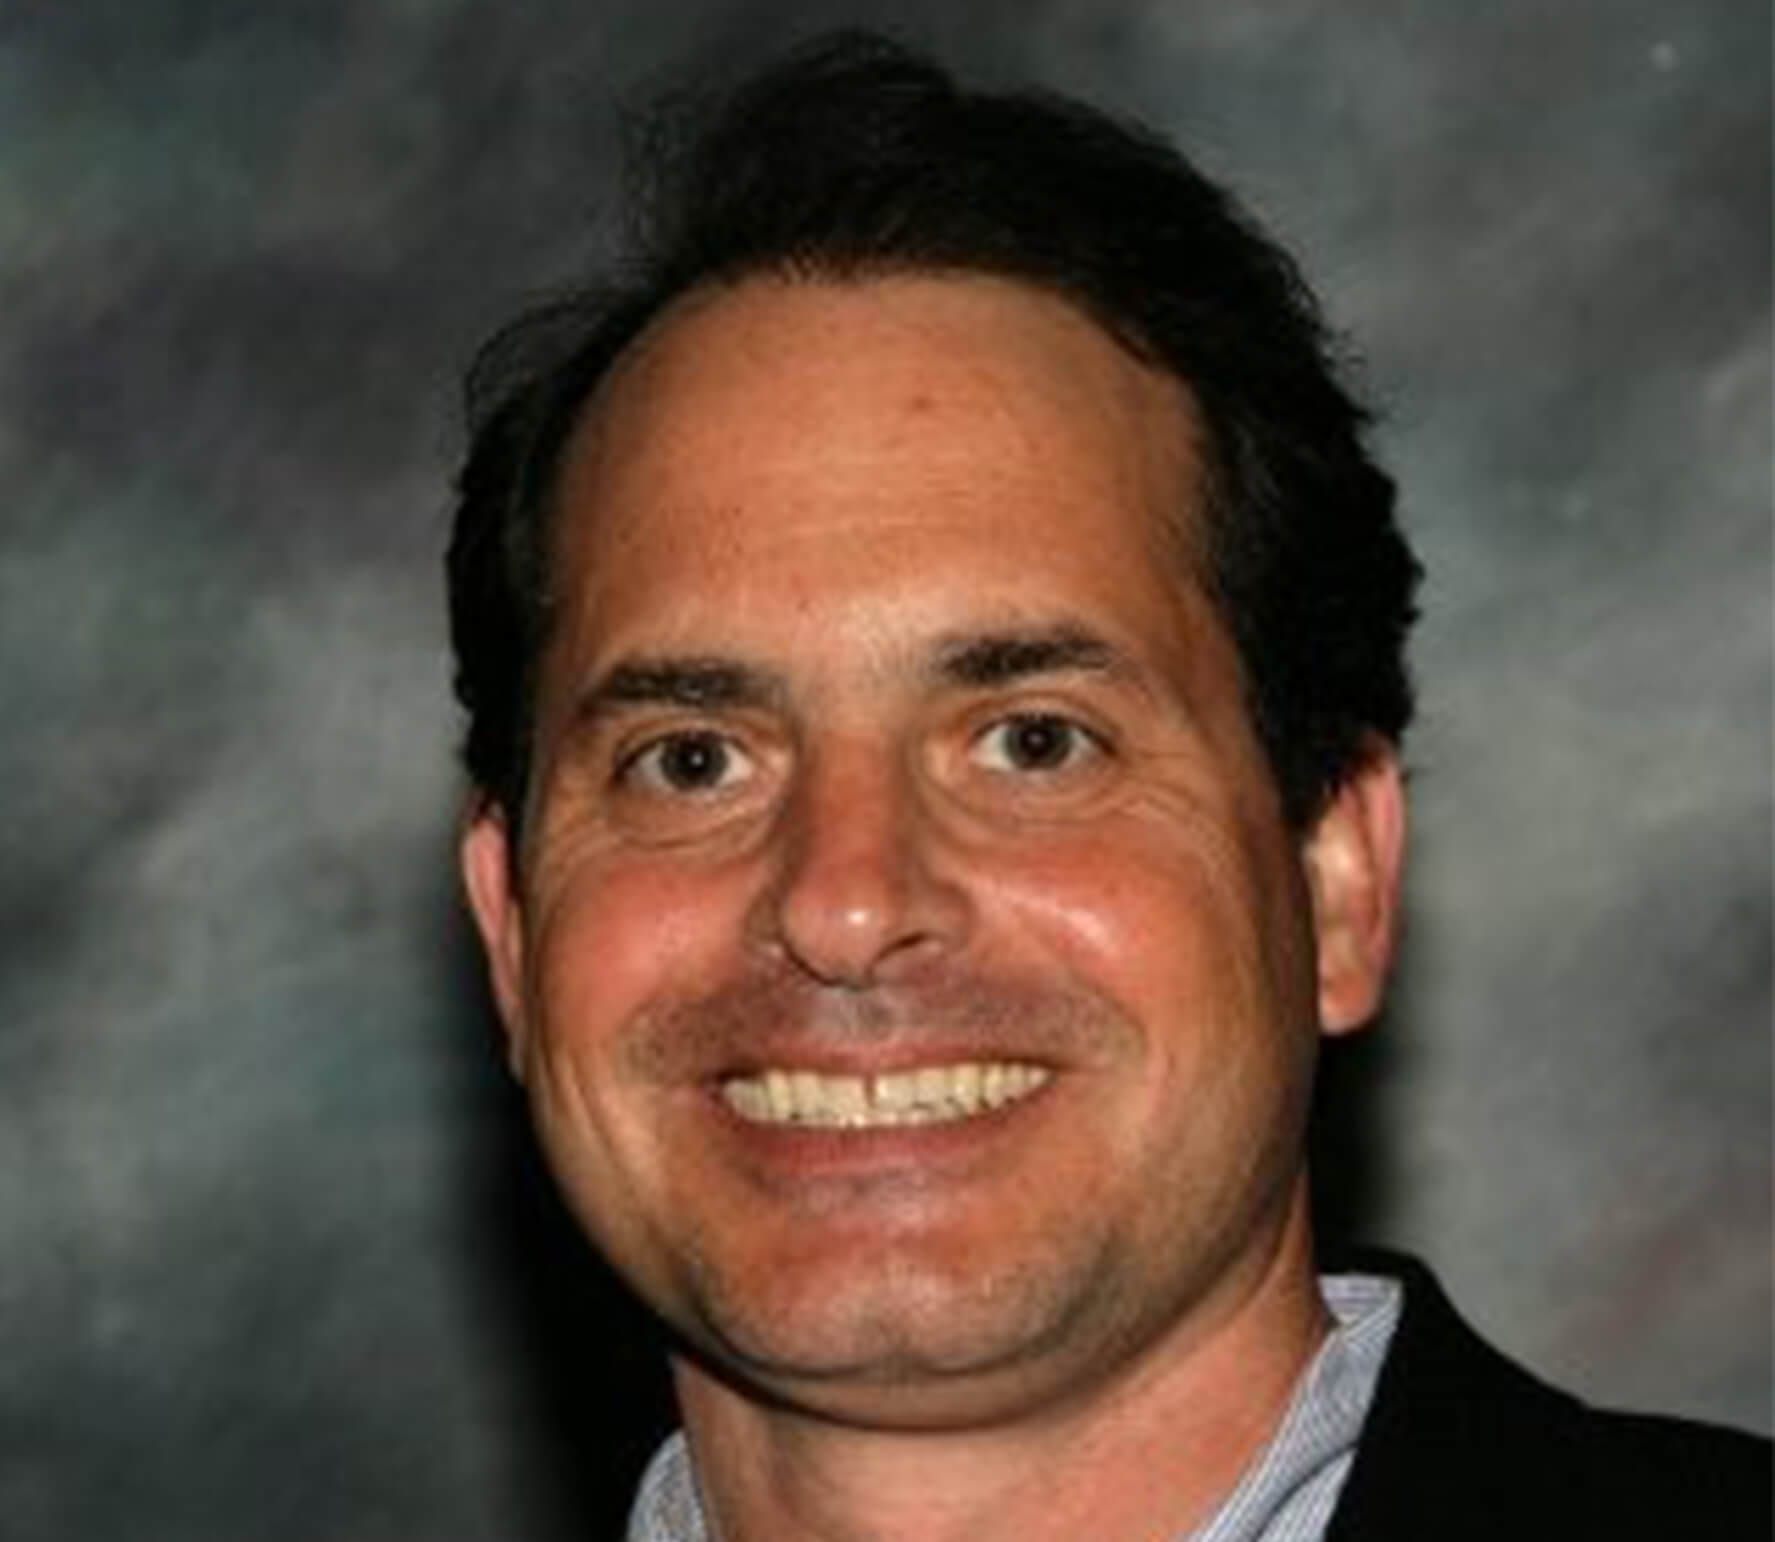 </p>
<p><center>Paul J. Fiala, Chief Operating Officer